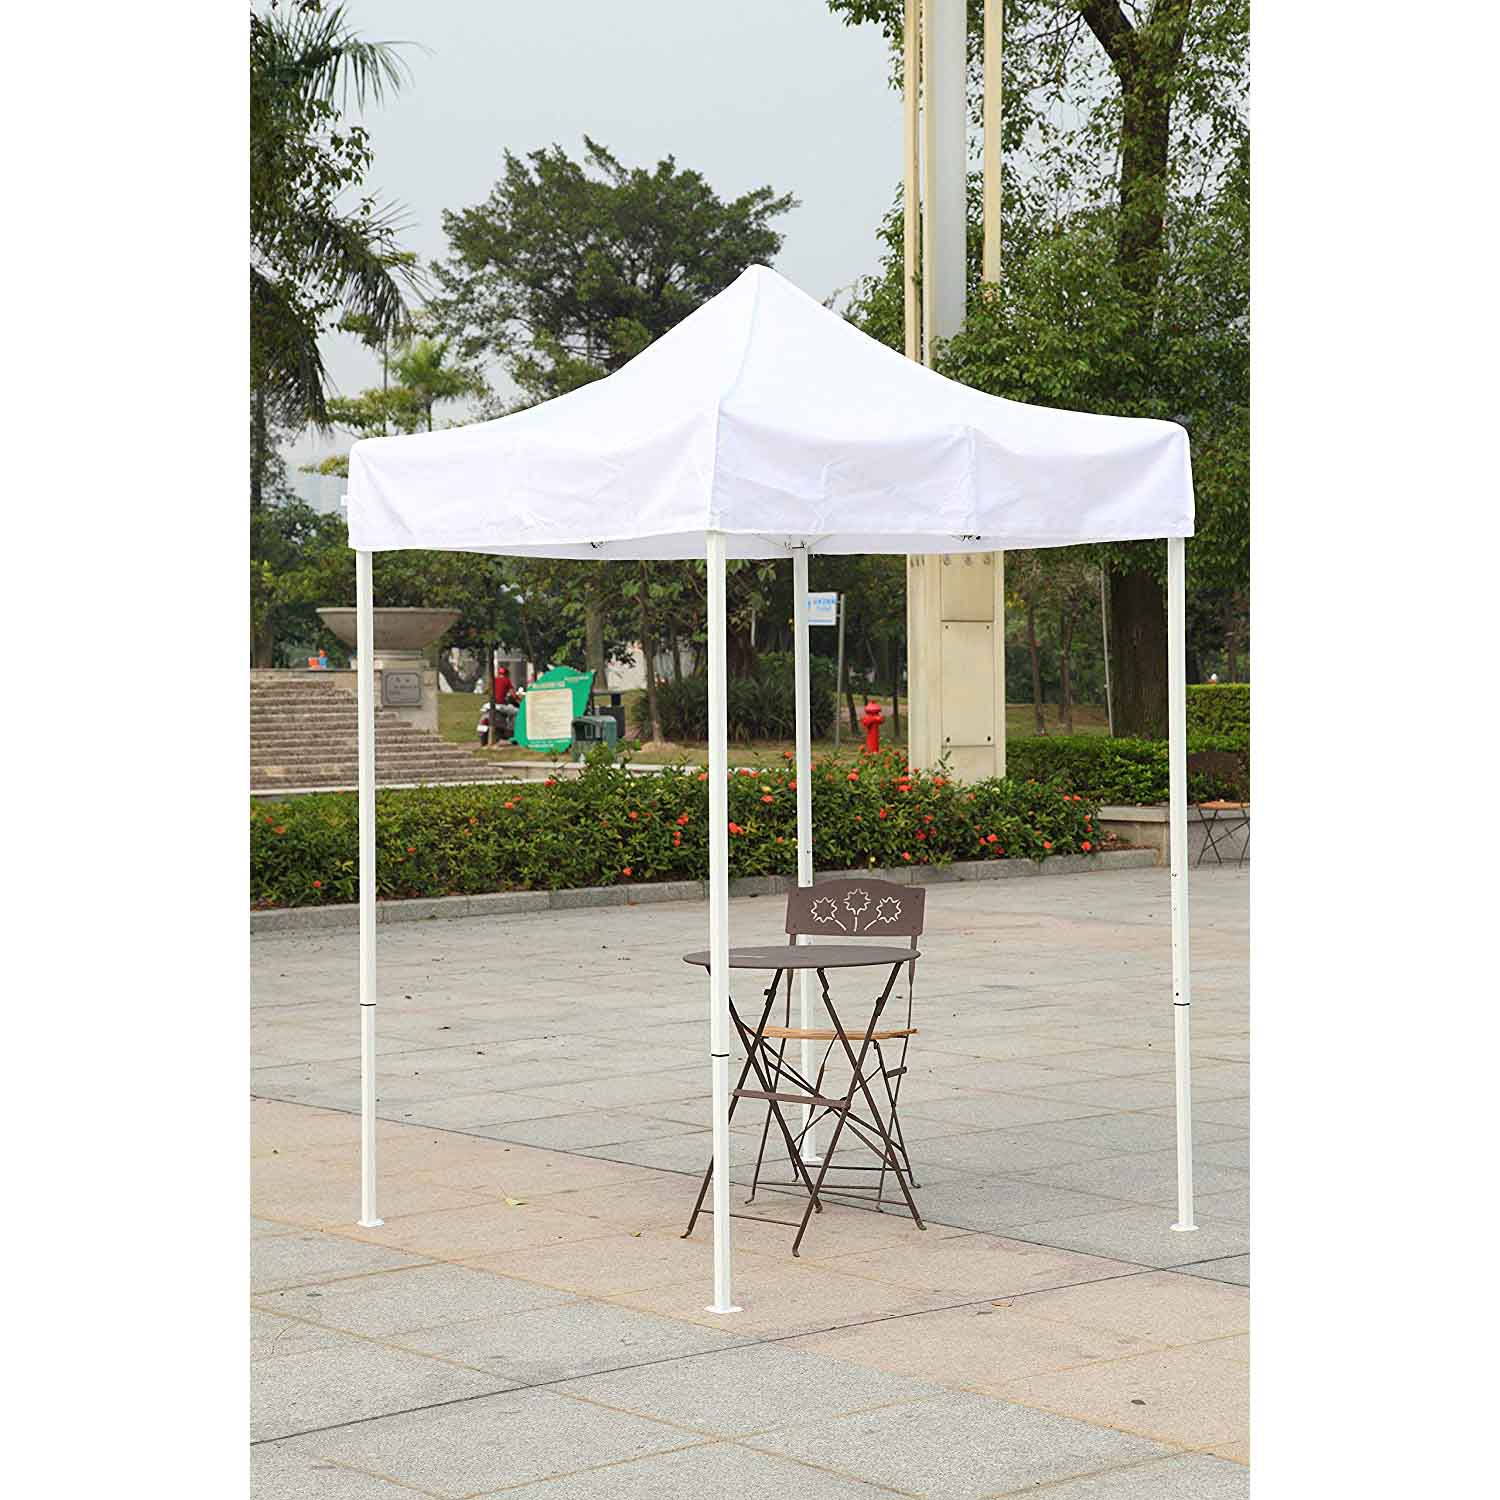 American Phoenix Multicolor Canopy Tent 5x5 Feet Party Tent [White Frame] Gazebo Canopy Commercial Fair Shelter Car Shelter Wedding Party Easily Pop U